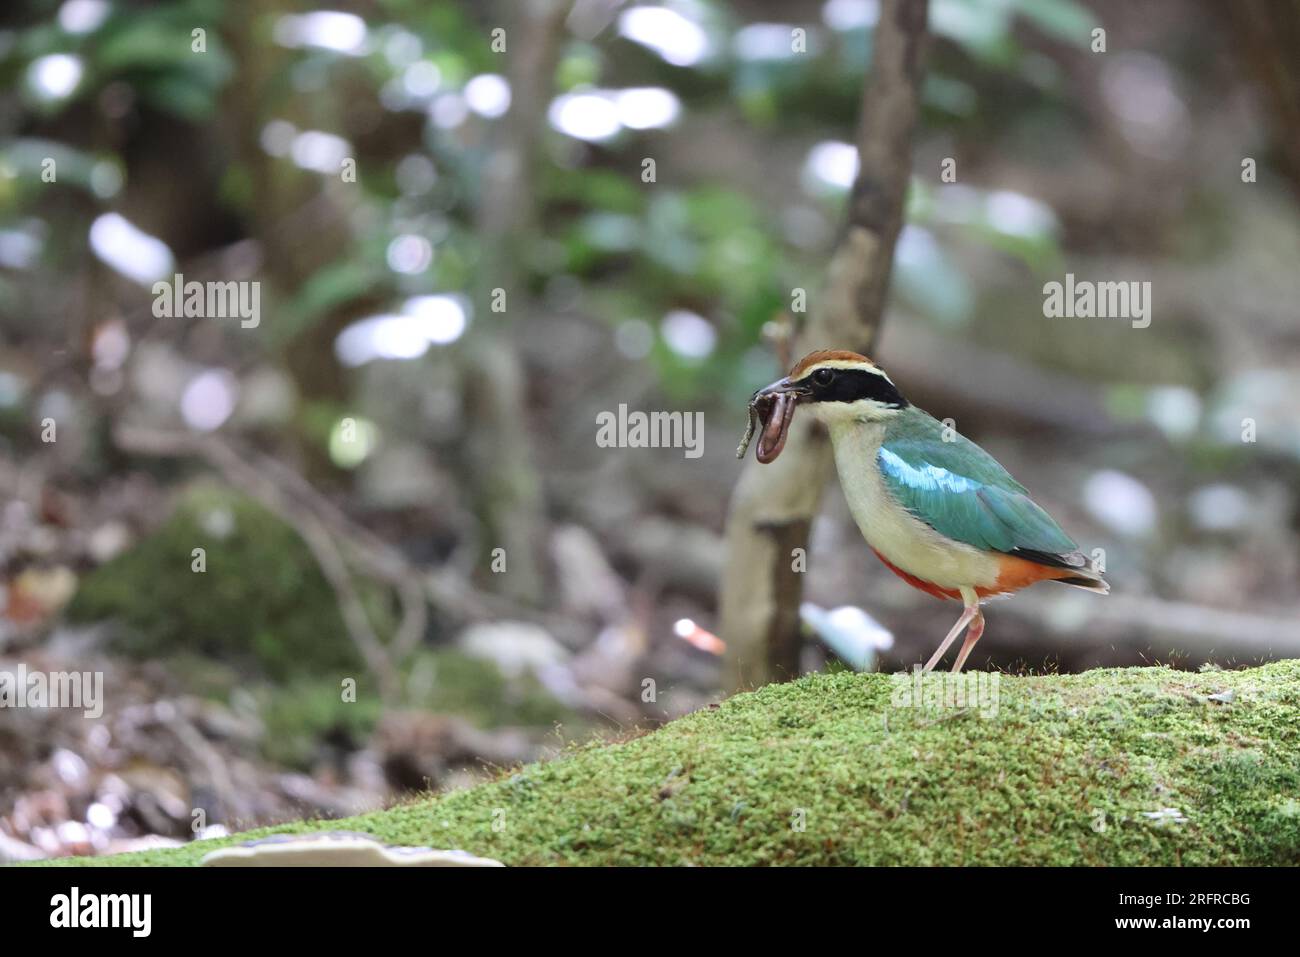 Fairy pitta (Pitta nympha) in Giappone Foto Stock